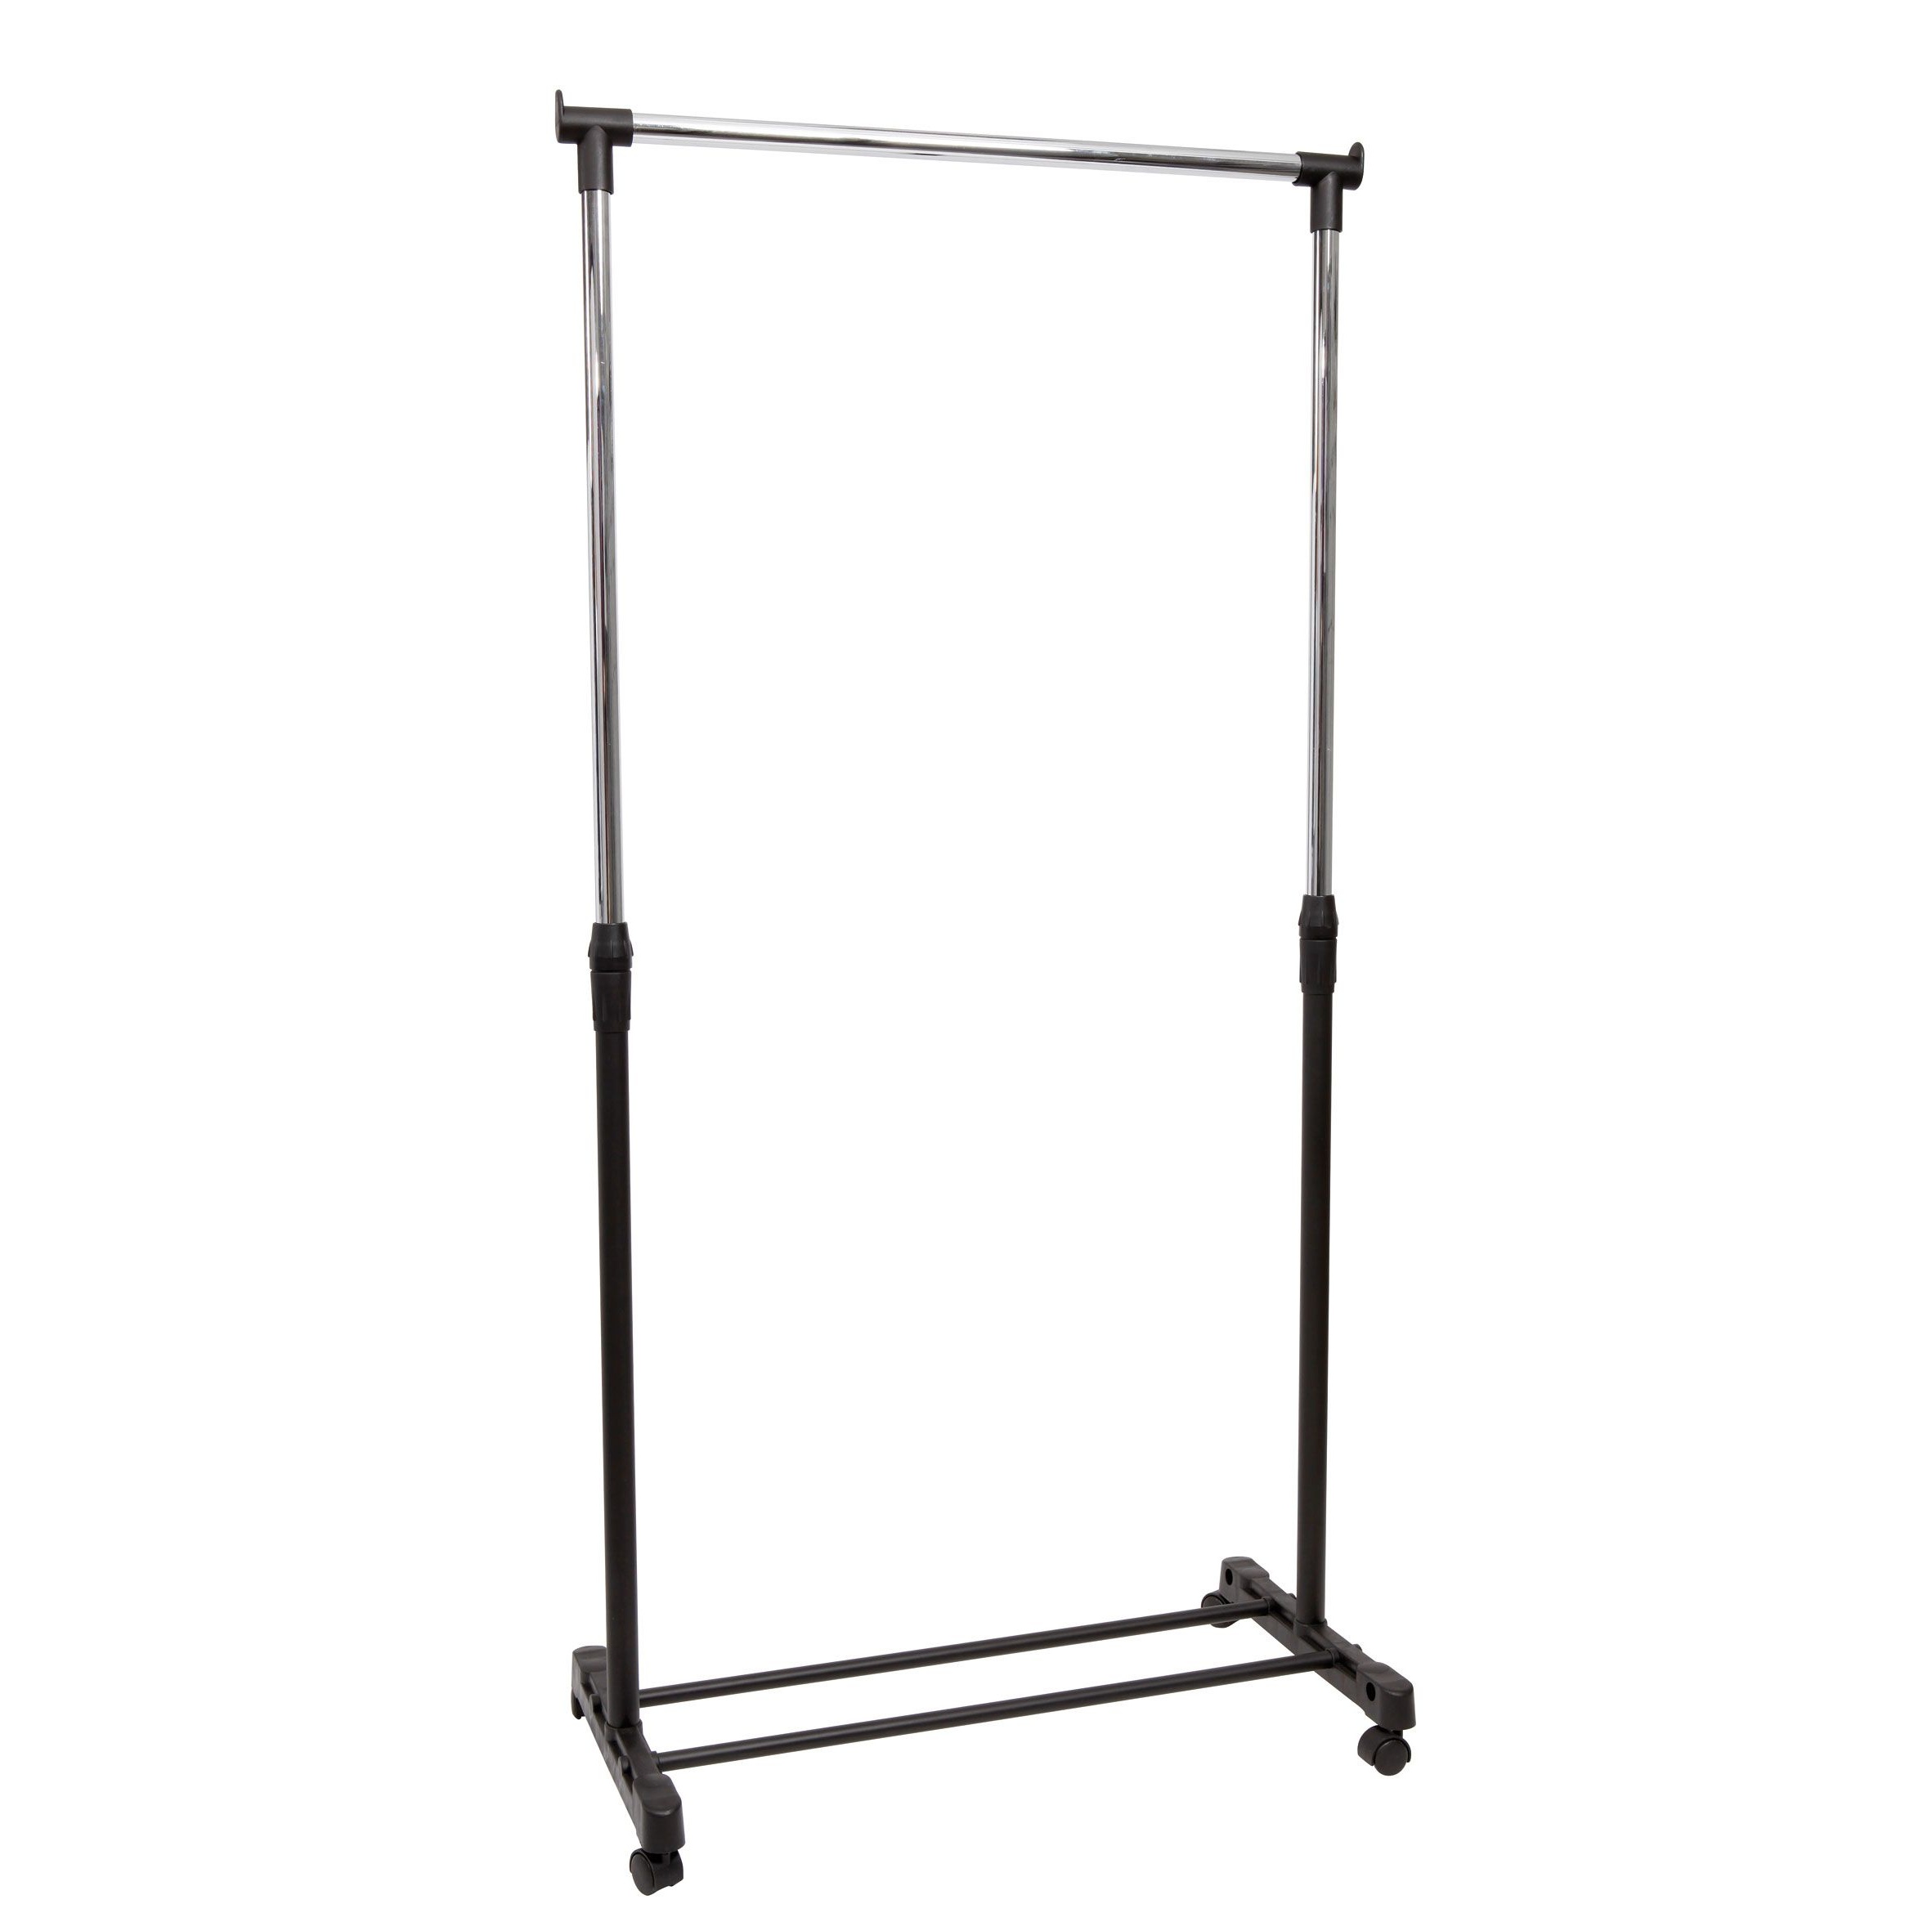 Telescopic Mobile Coat Rail from our Office Coat Stands range.